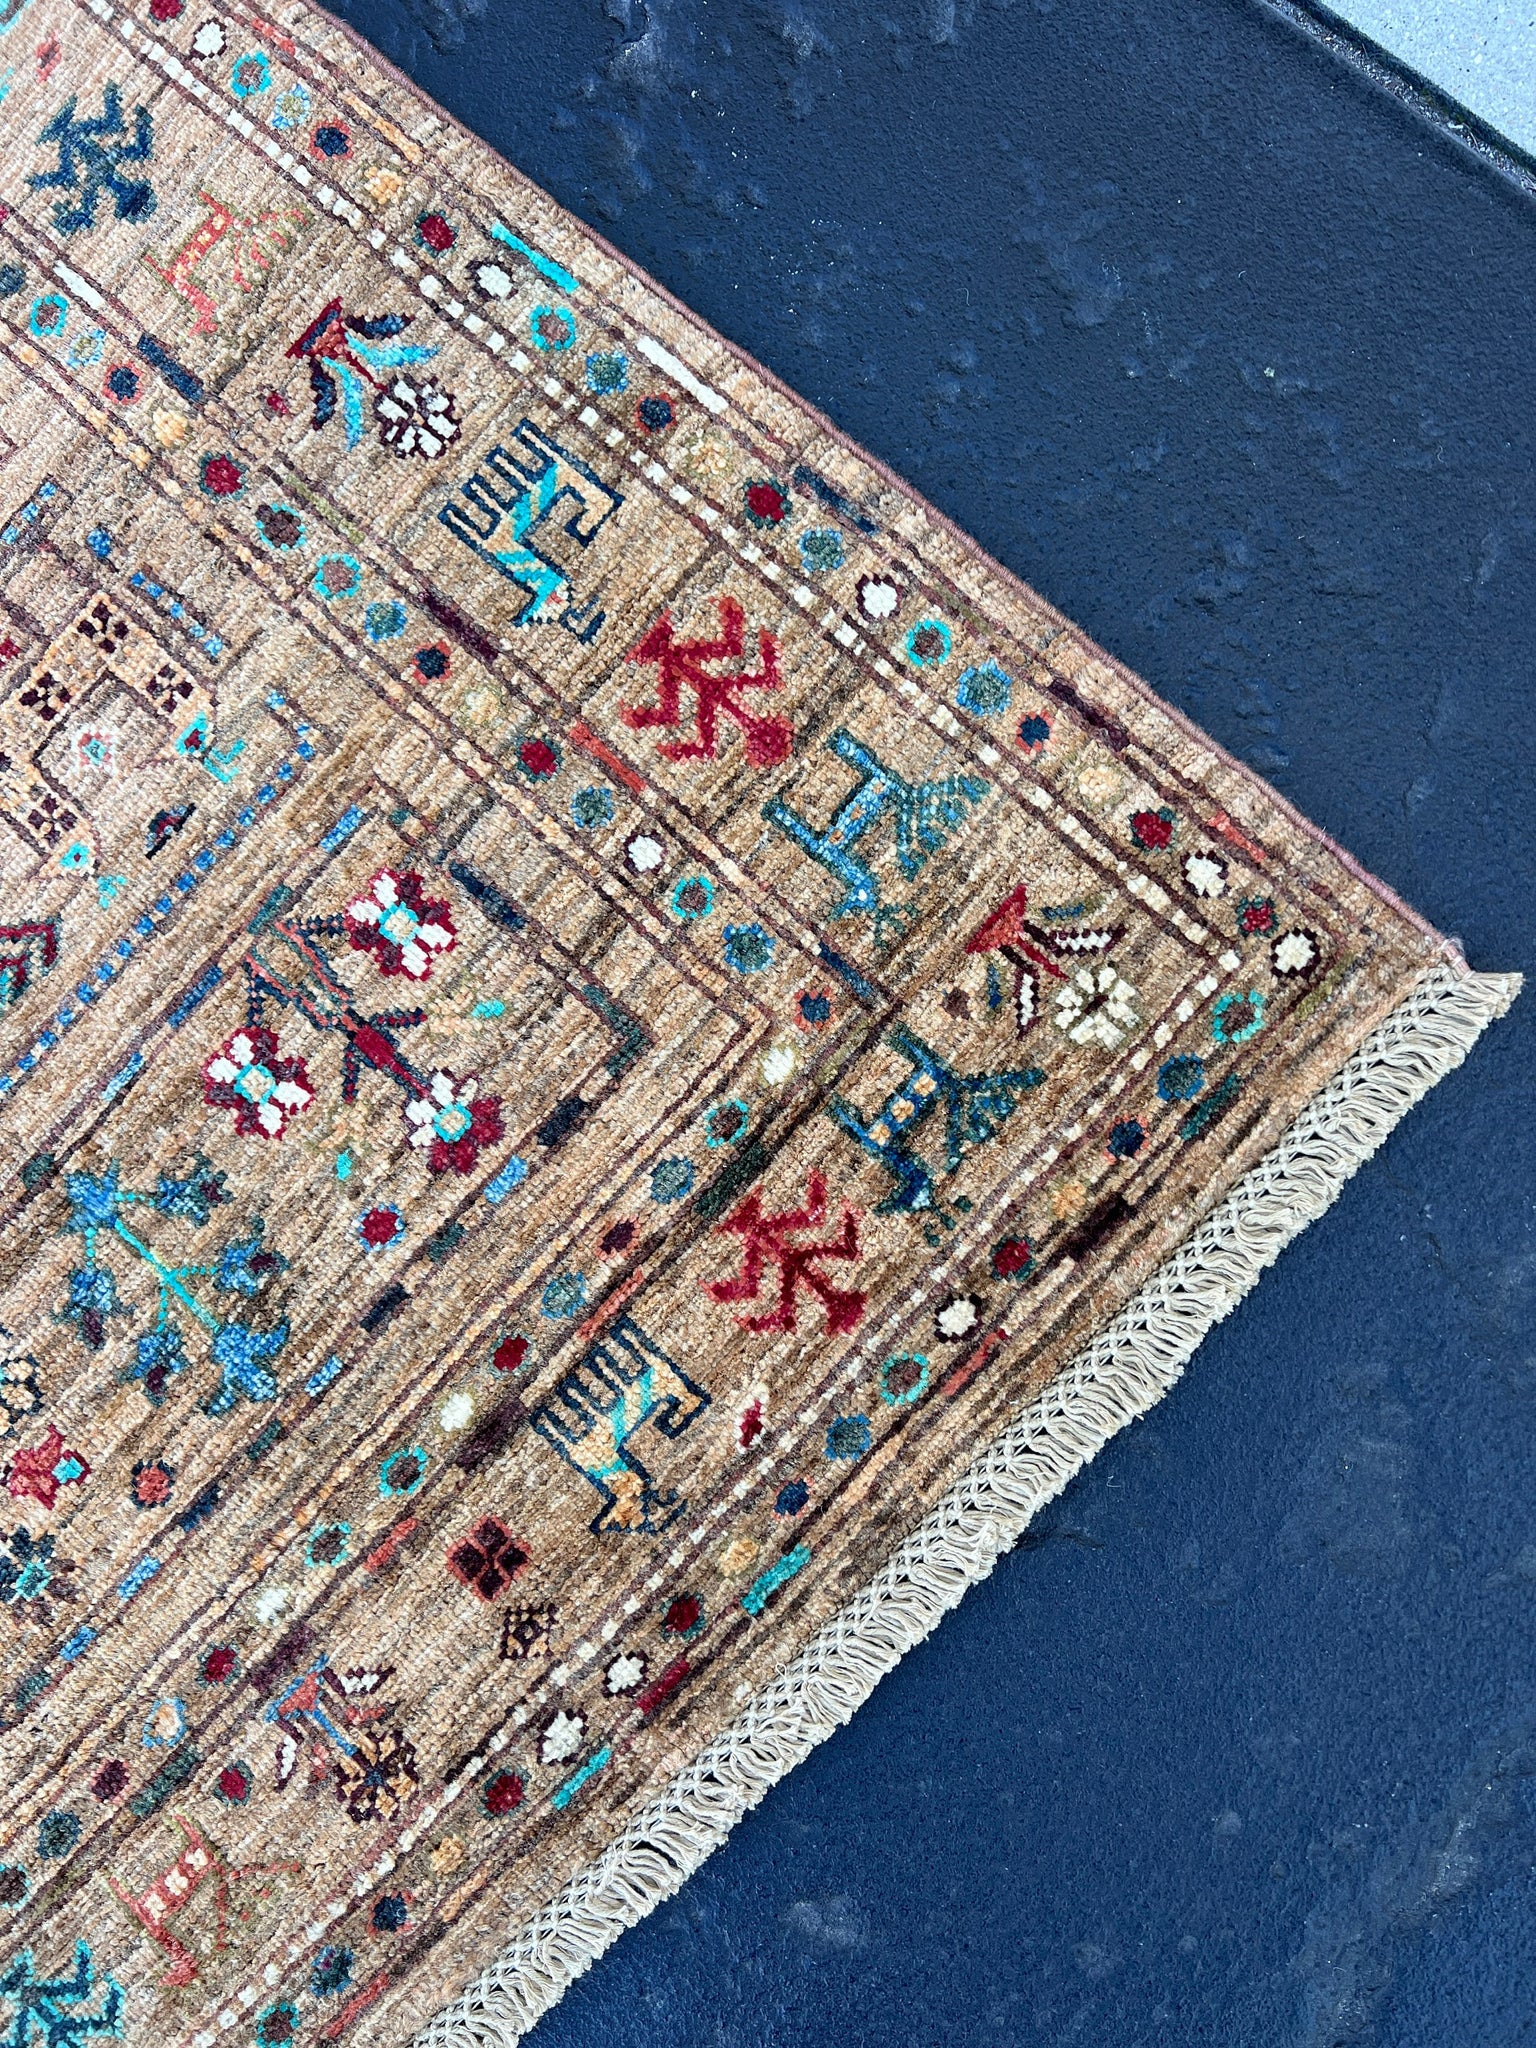 3x10 (90x305) Handmade Afghan Runner Rug | Brown Mocha Brown Red Blue Turquoise Ivory Green Turkish Moroccan Oriental Animals Plants Trees